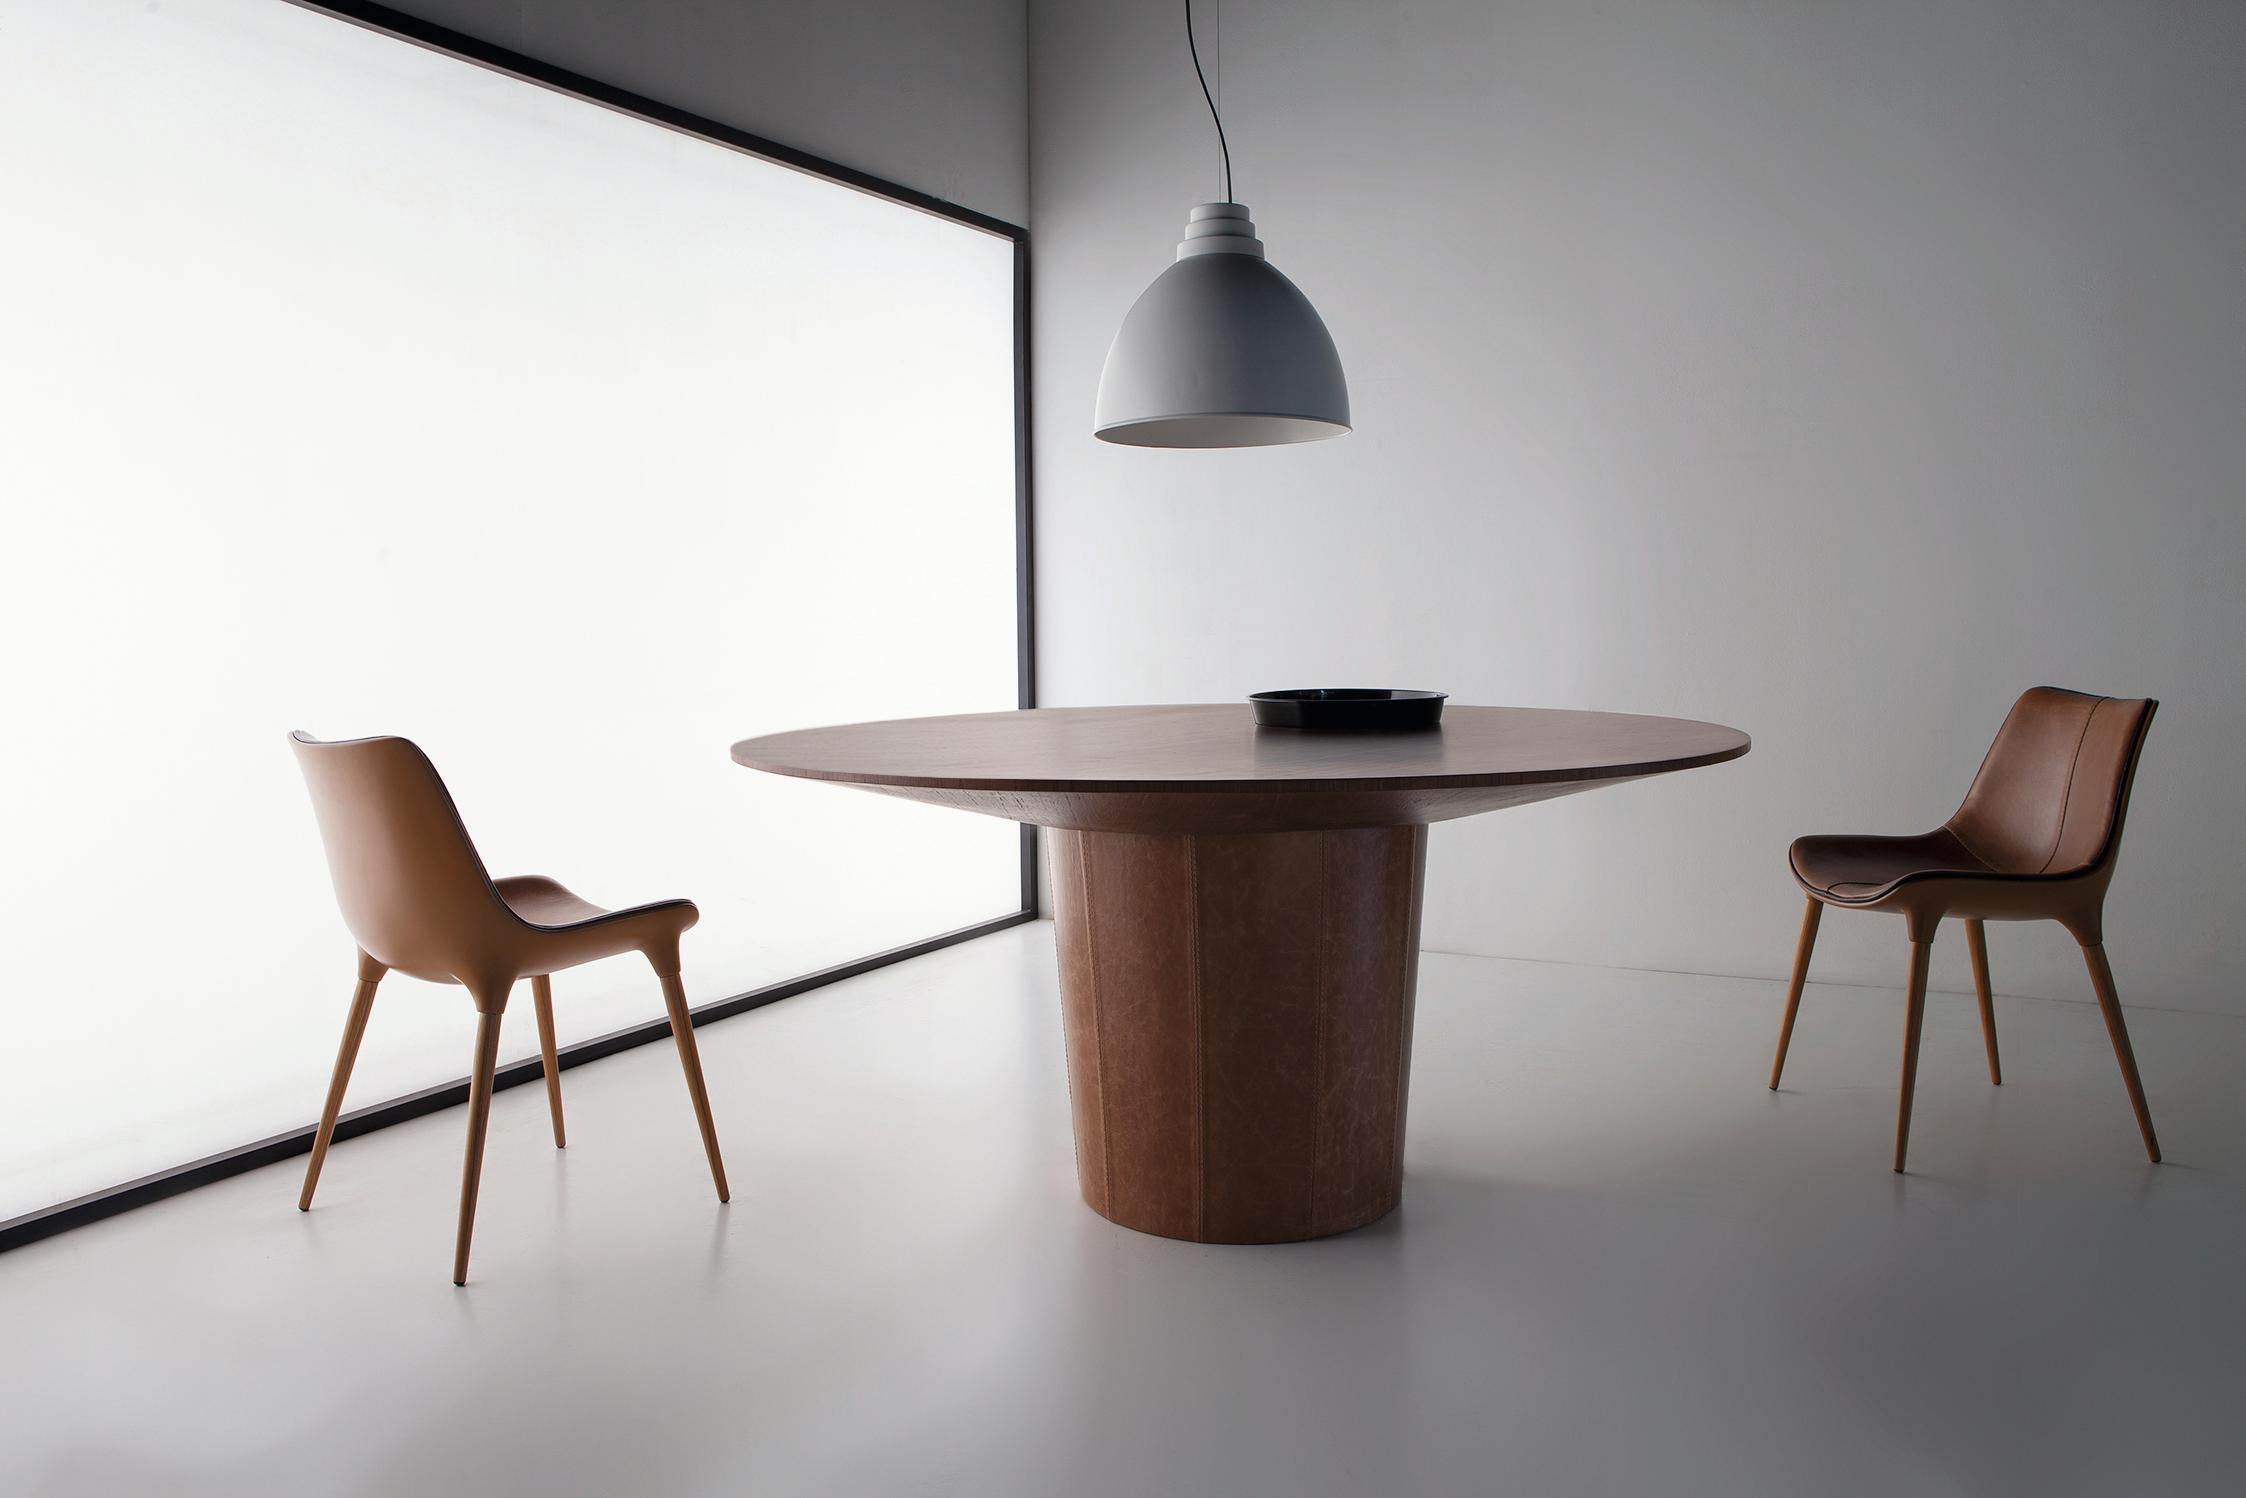 Joy Dining Table by Doimo Brasil
Dimensions: D 160 x H 75 cm 
Materials: Base: Natural Leather, Top: Veneer. 



With the intention of providing good taste and personality, Doimo deciphers trends and follows the evolution of man and his space. To